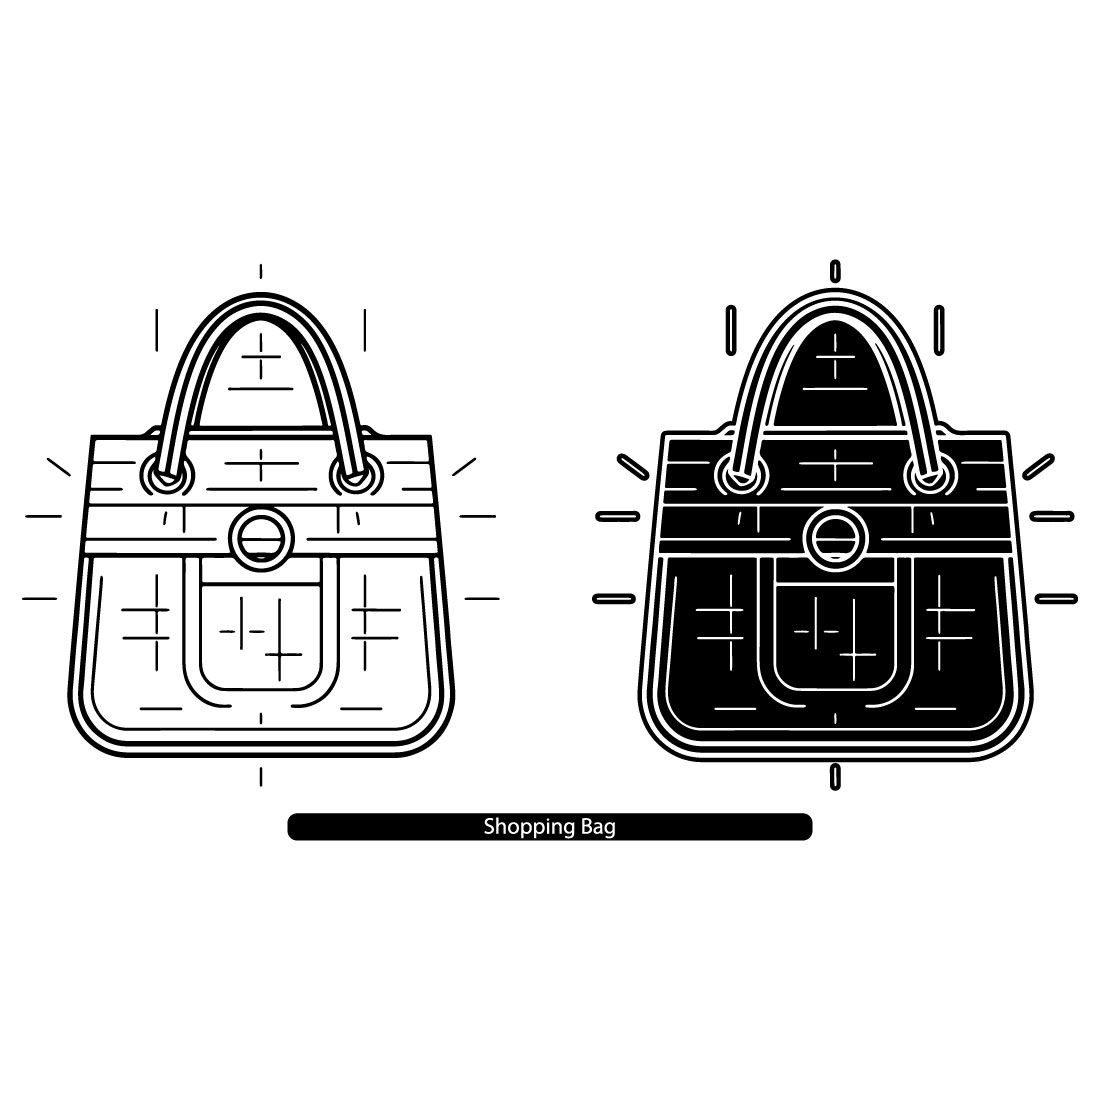 School Bag Drawing Step by Step for Beginners